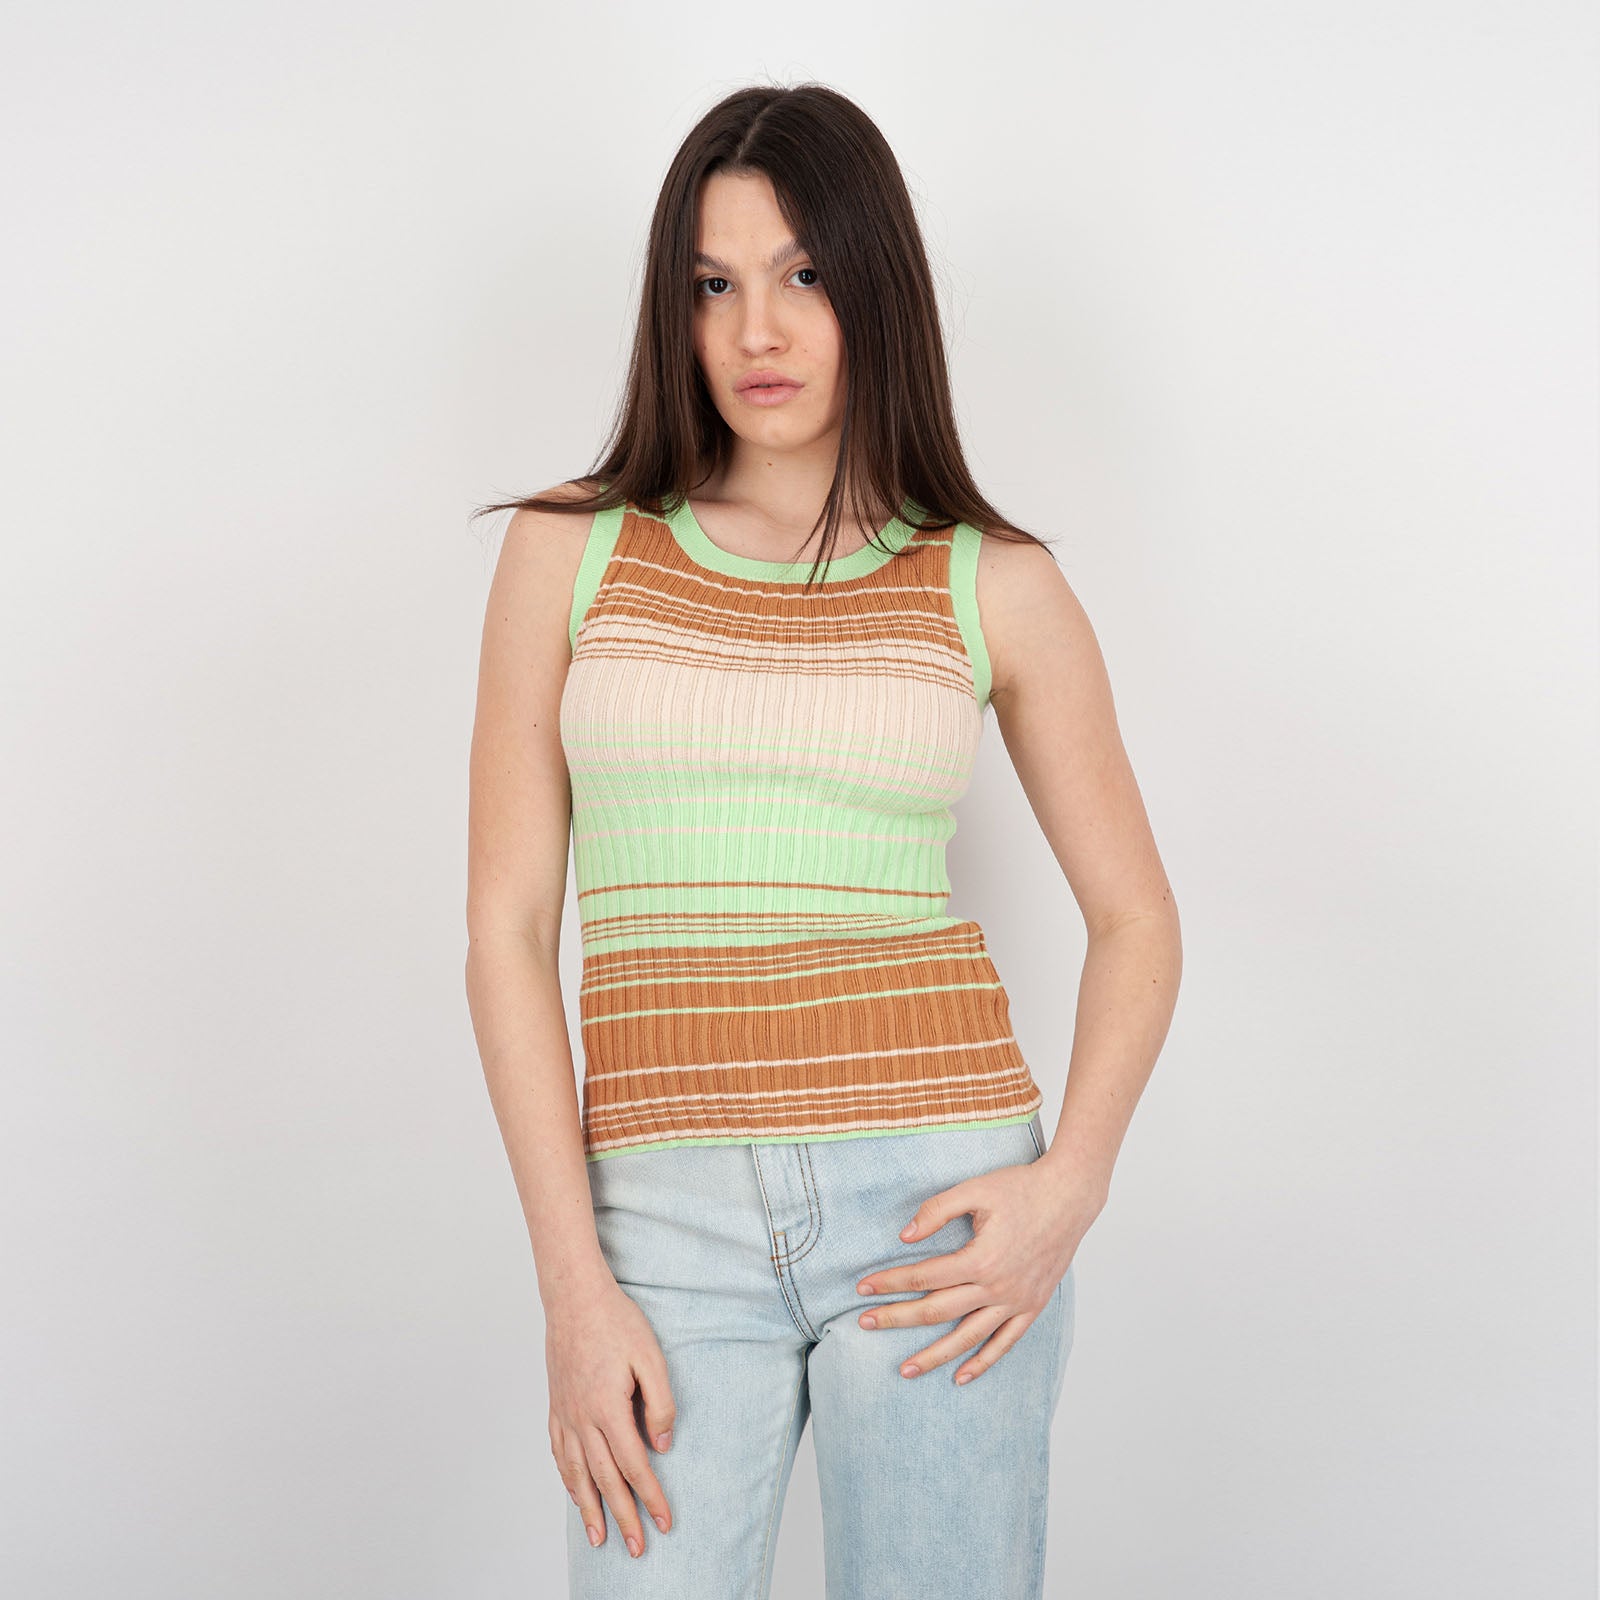 Absolut Cashmere Hilary Multicolor Wool Tank Top - 6